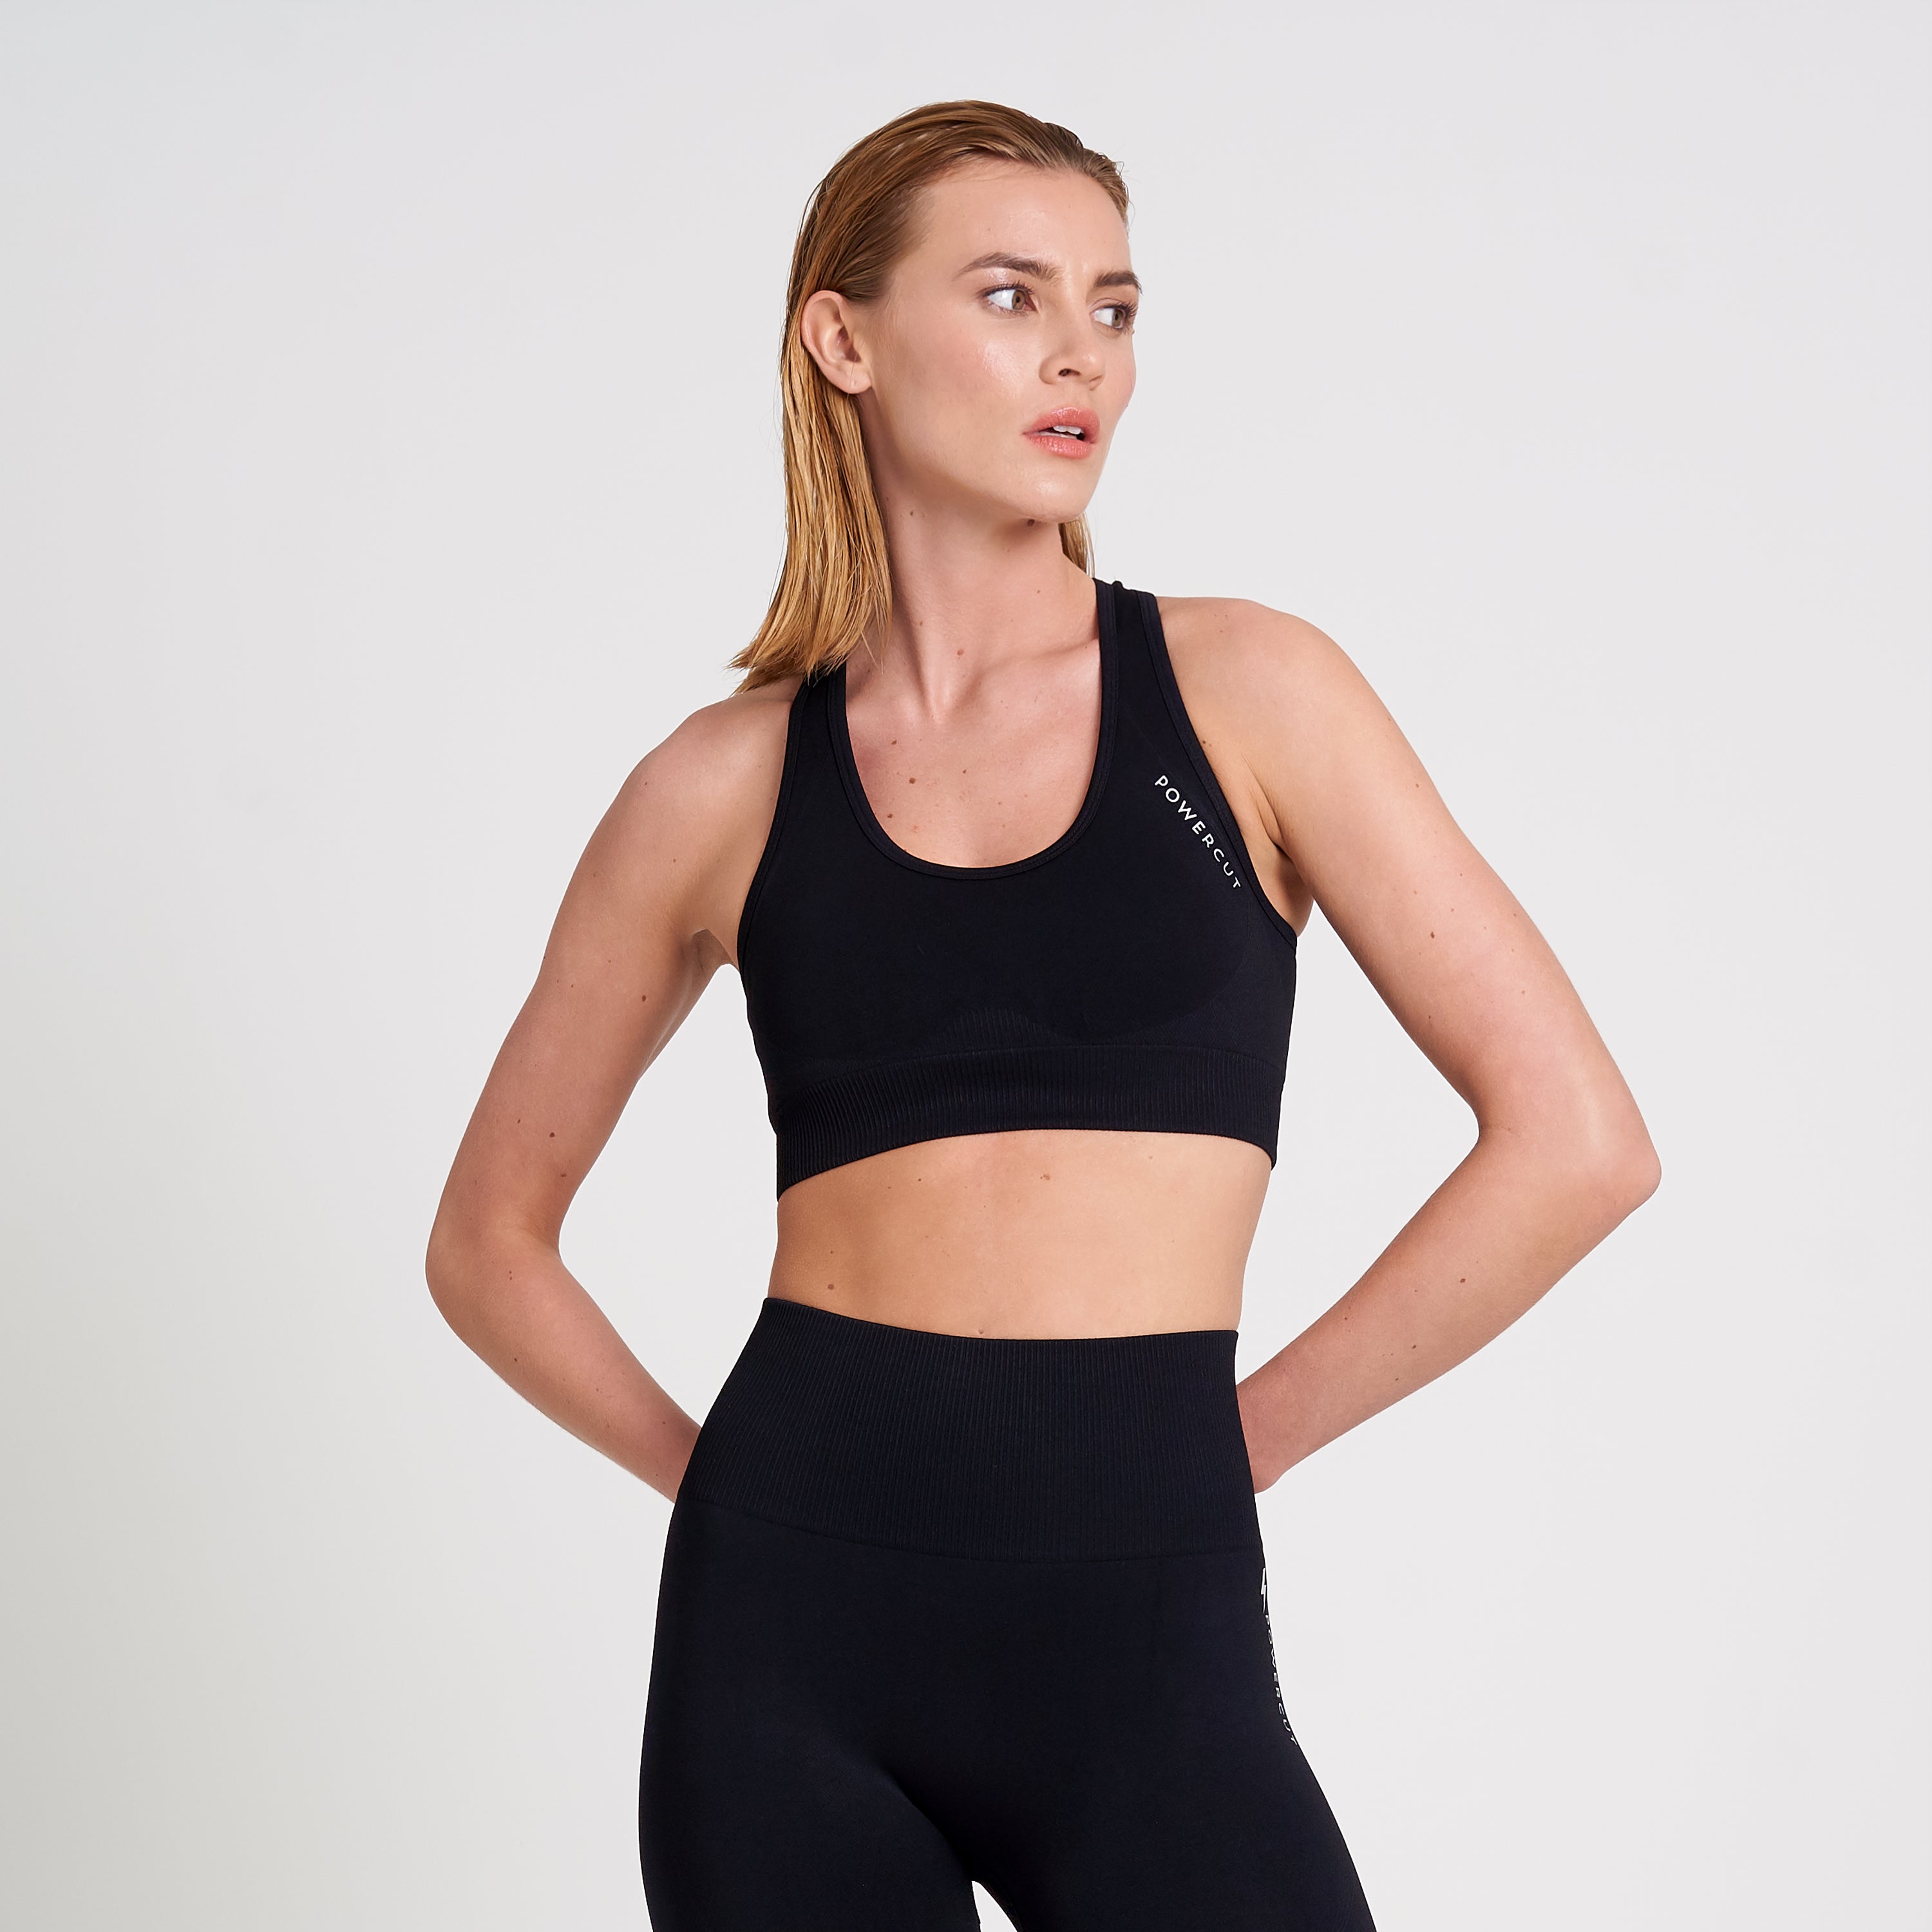 Support local and look good with Powercut athleisure!